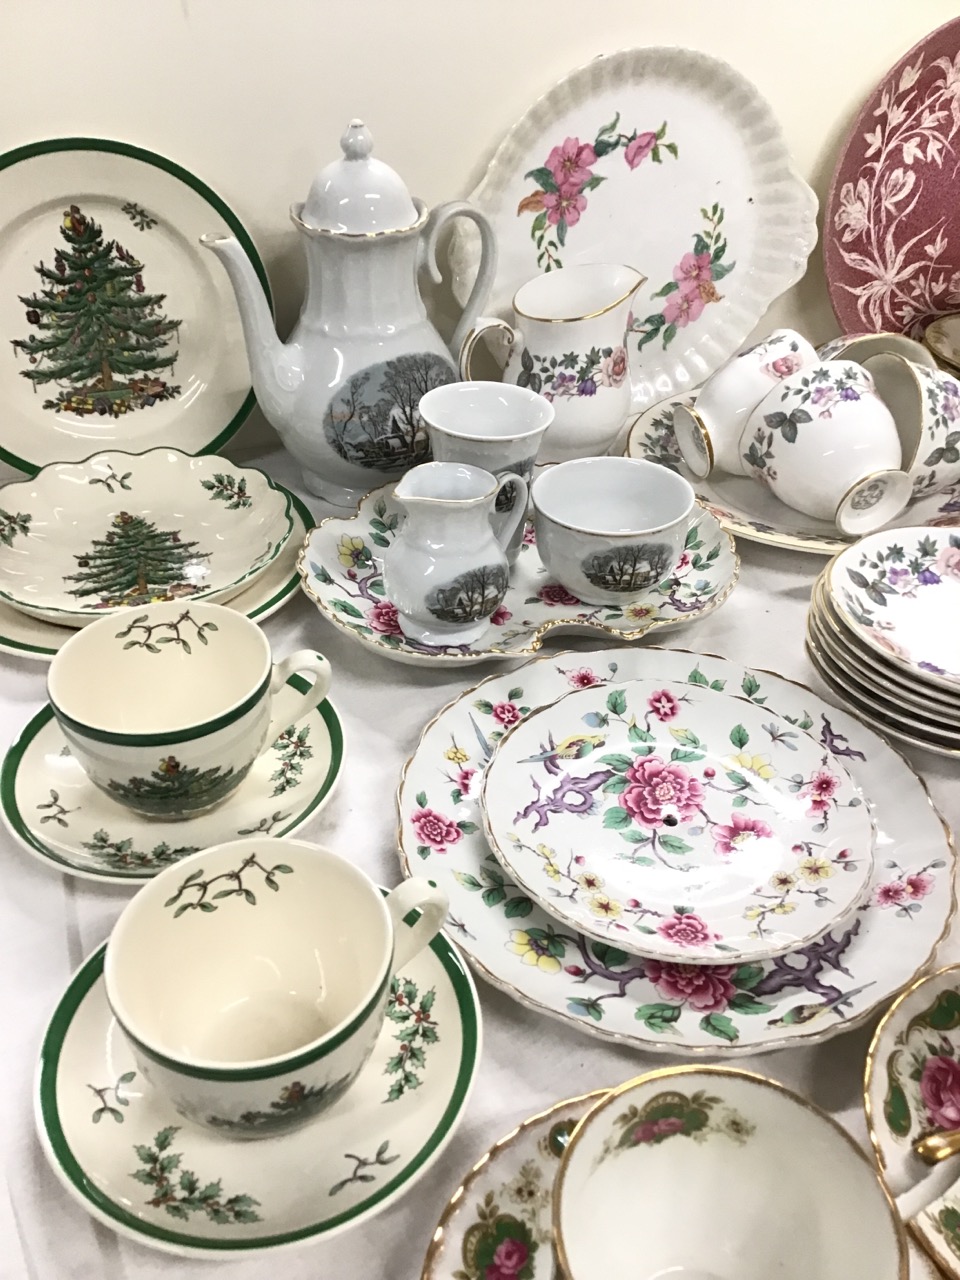 Miscellaneous ceramics - a Royal Grafton teaset in the Fragrance pattern, a Spode Christmas Tree - Image 2 of 3